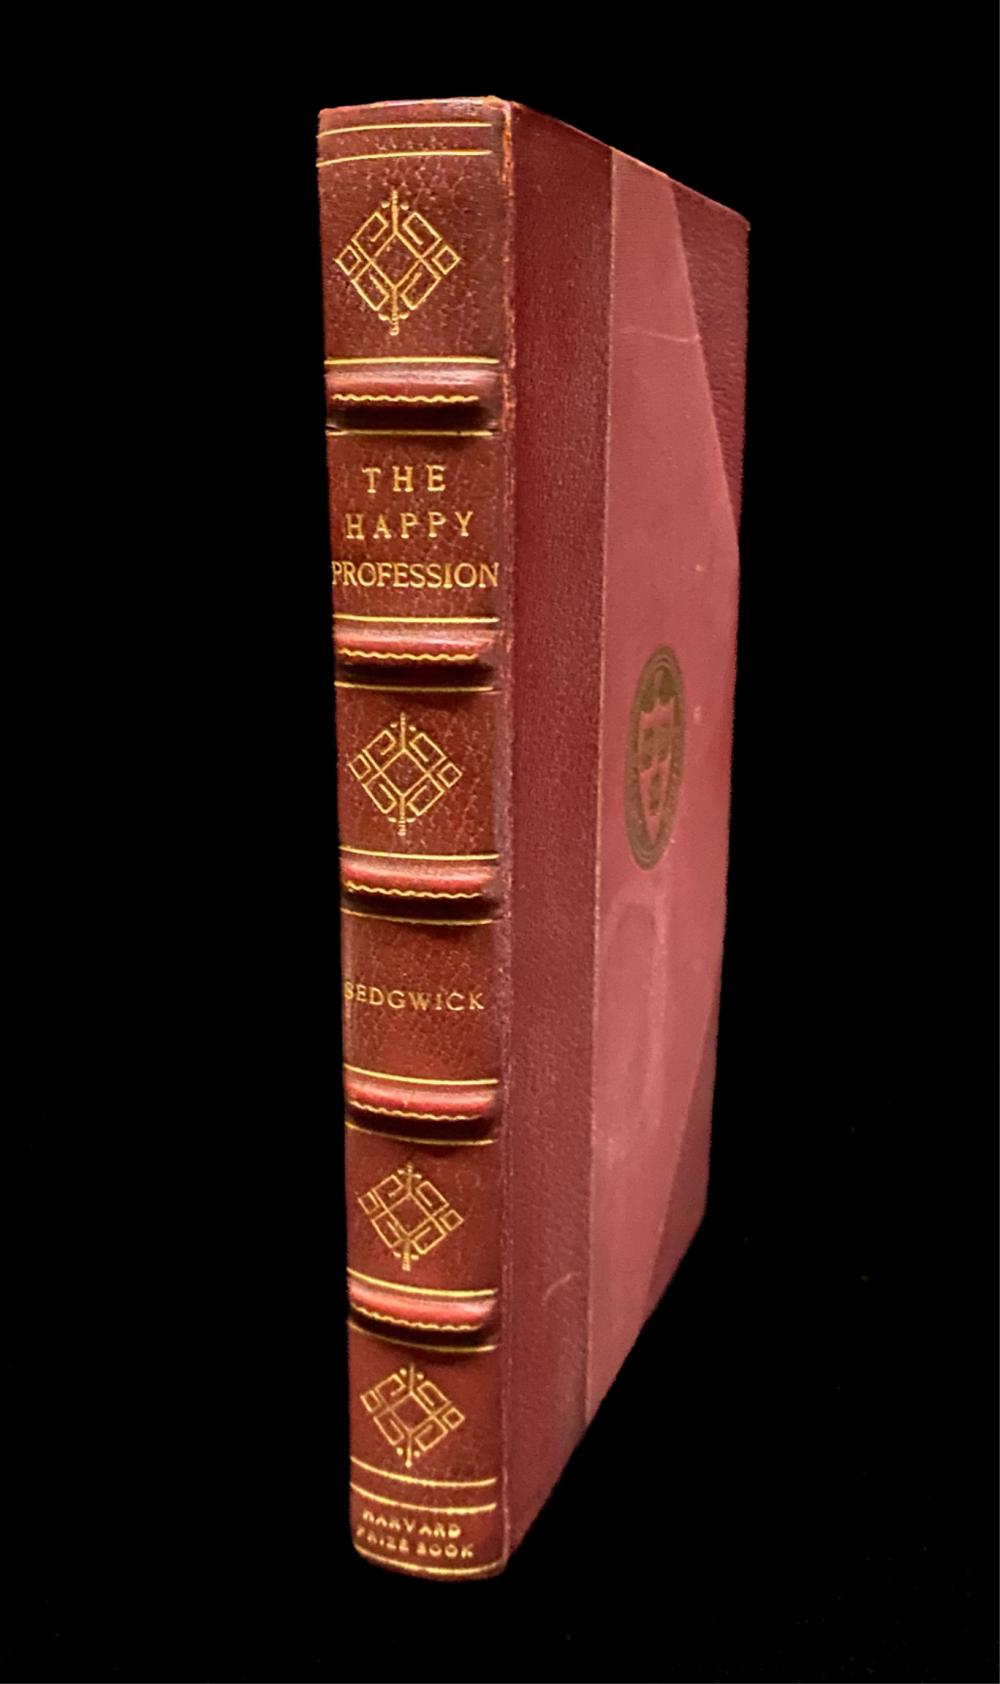 THE HAPPY PROFESSION BY ELLERY SEDGWICKThe